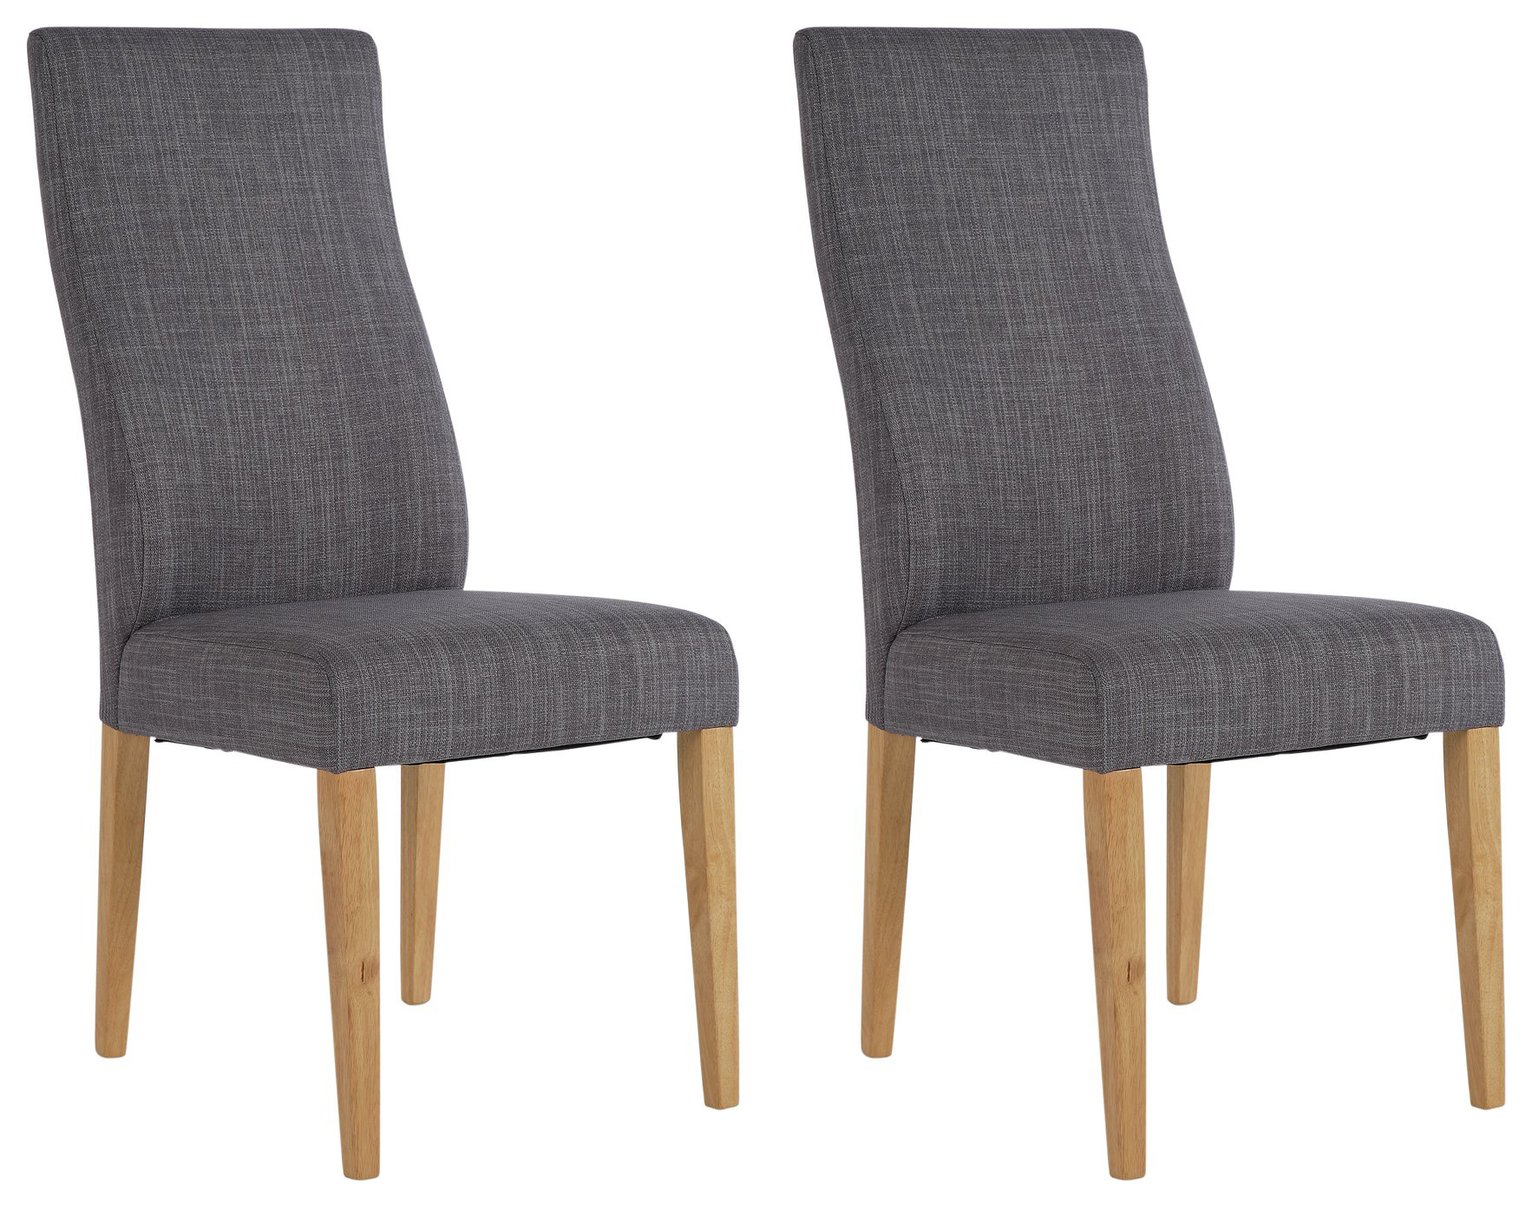 Argos Home Pair of High Back Curved Dining Chairs - Grey